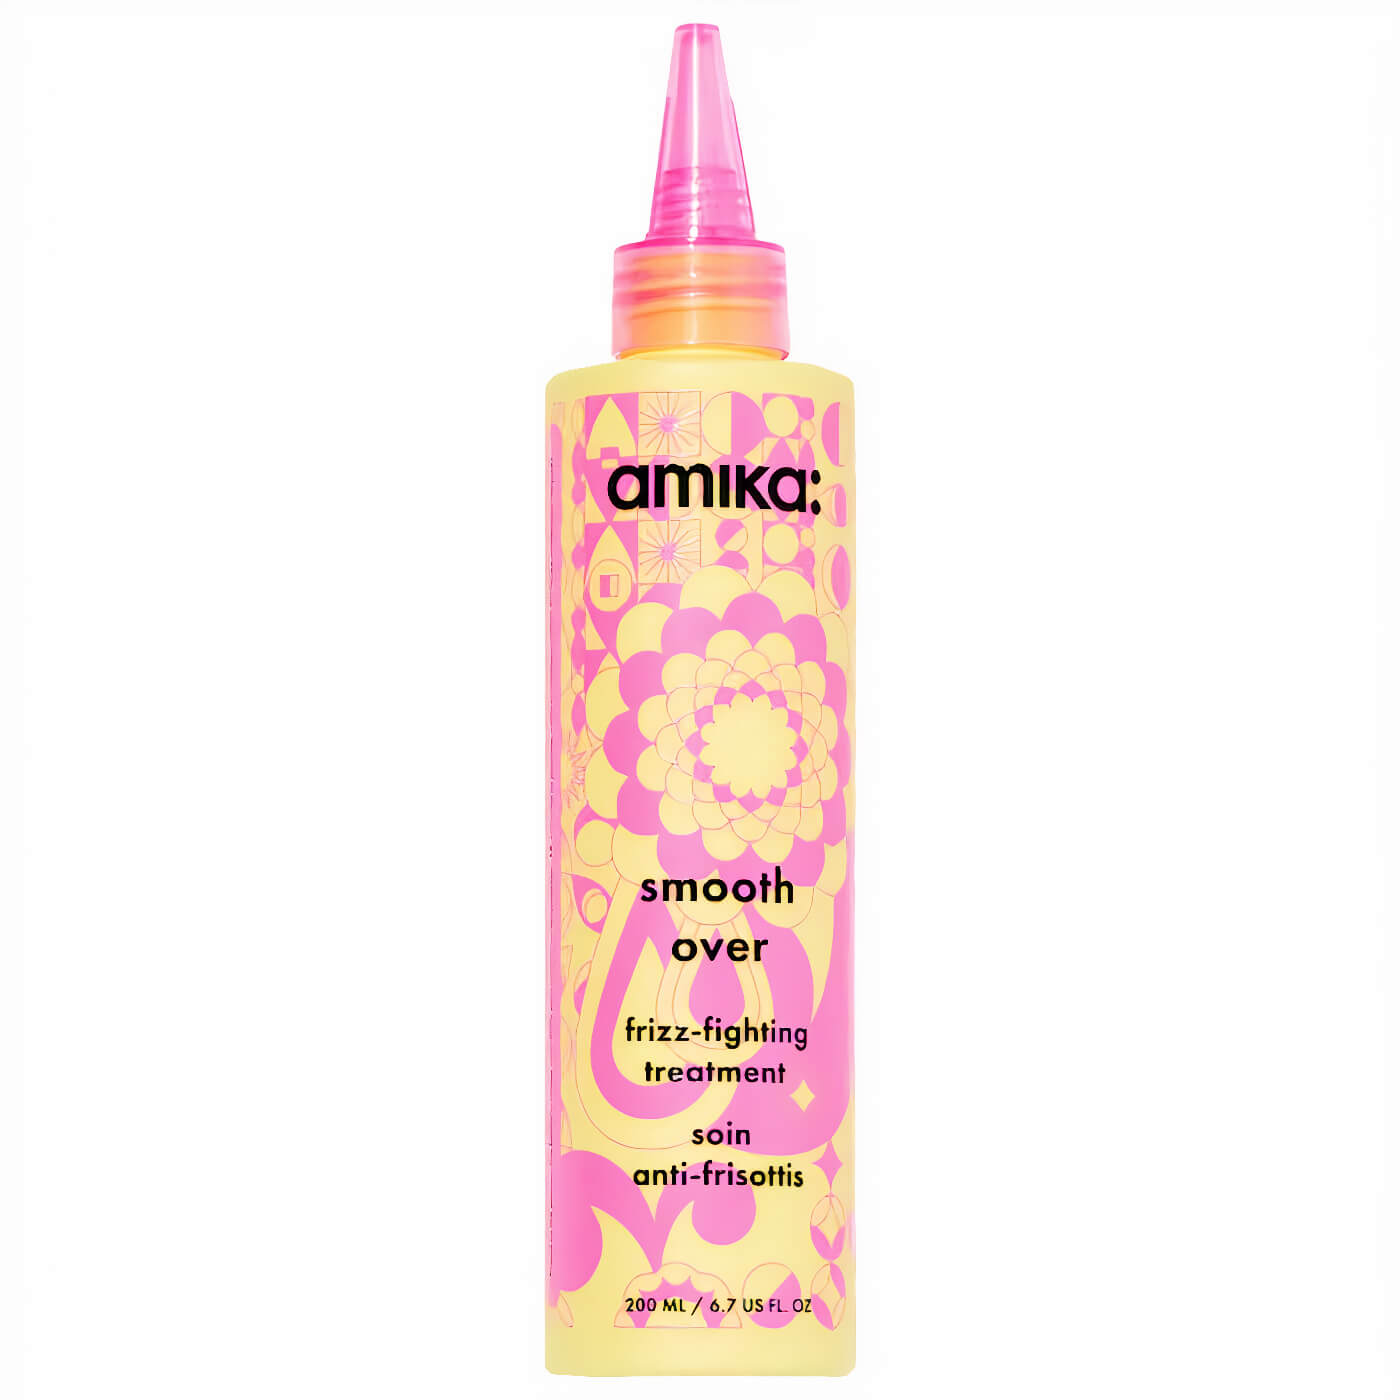 Amika: Smooth Over Frizz Fighting Treatment